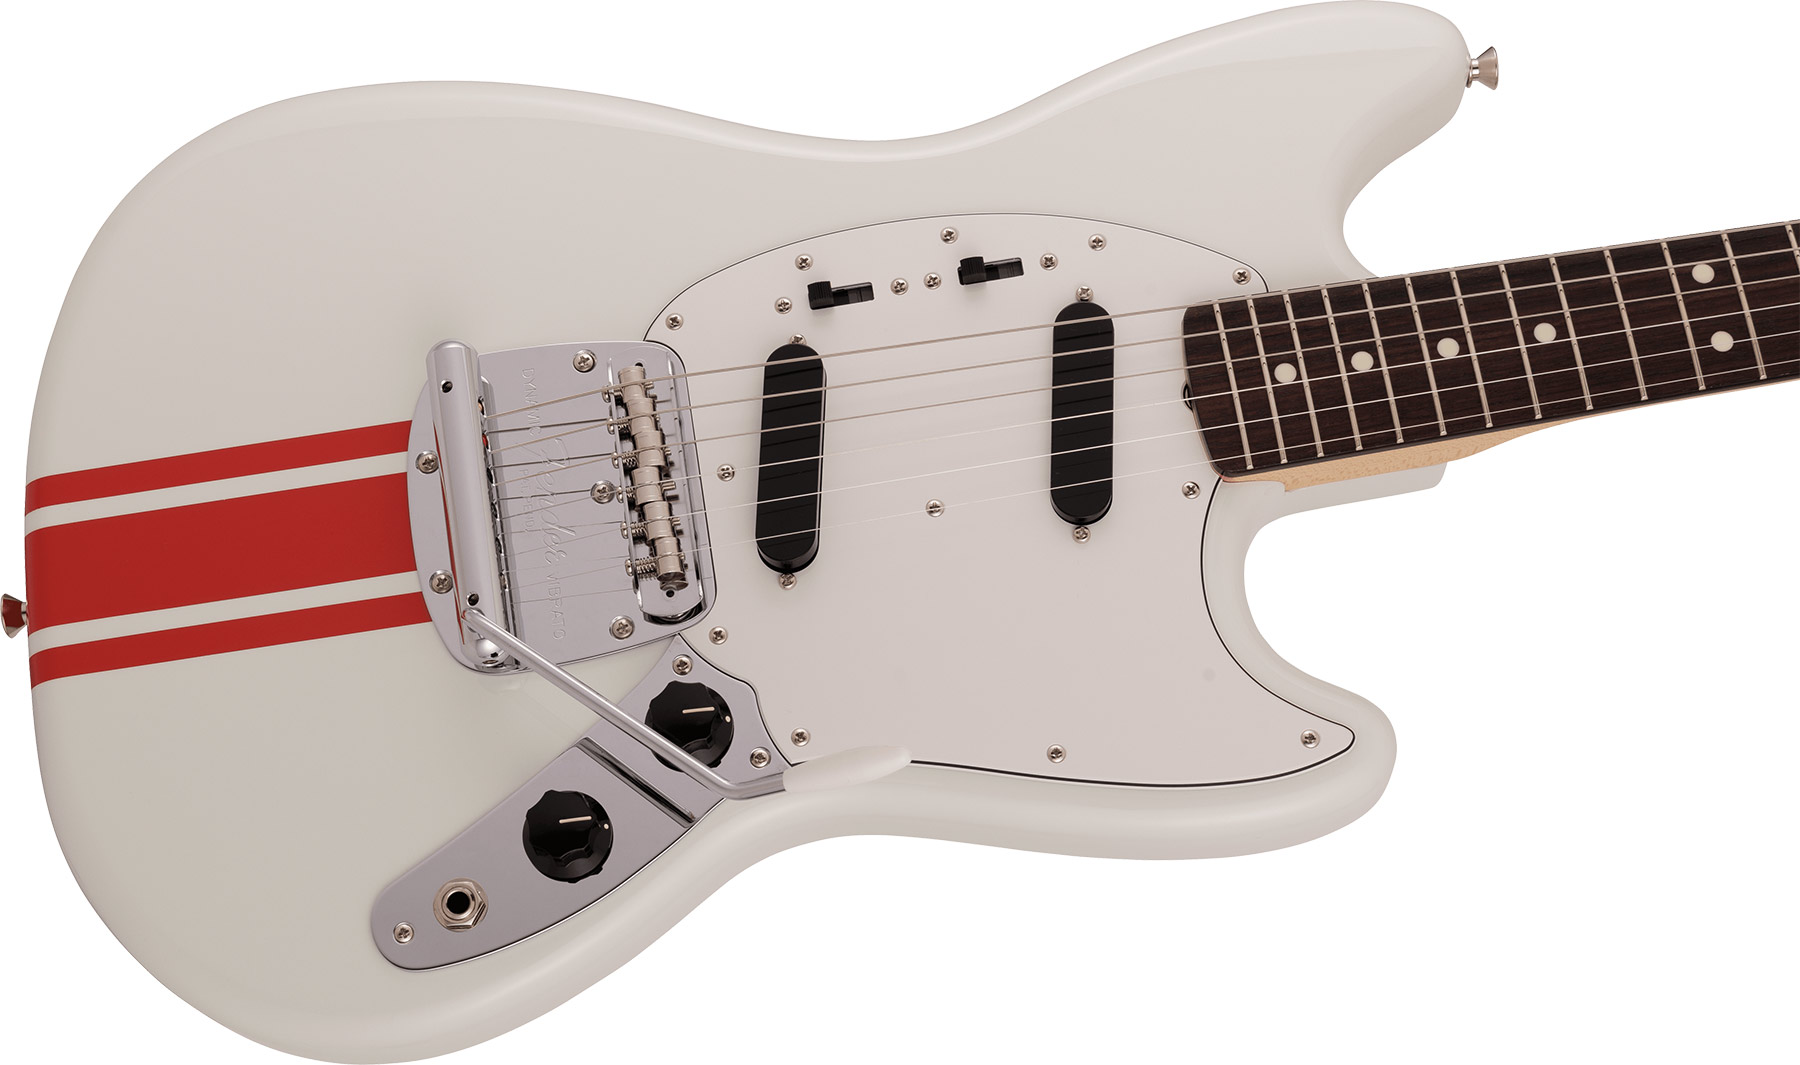 Fender Mustang Traditional 60s Mij Jap 2s Trem Rw - Olympic White W/ Red Competition Stripe - Guitarra electrica retro rock - Variation 2